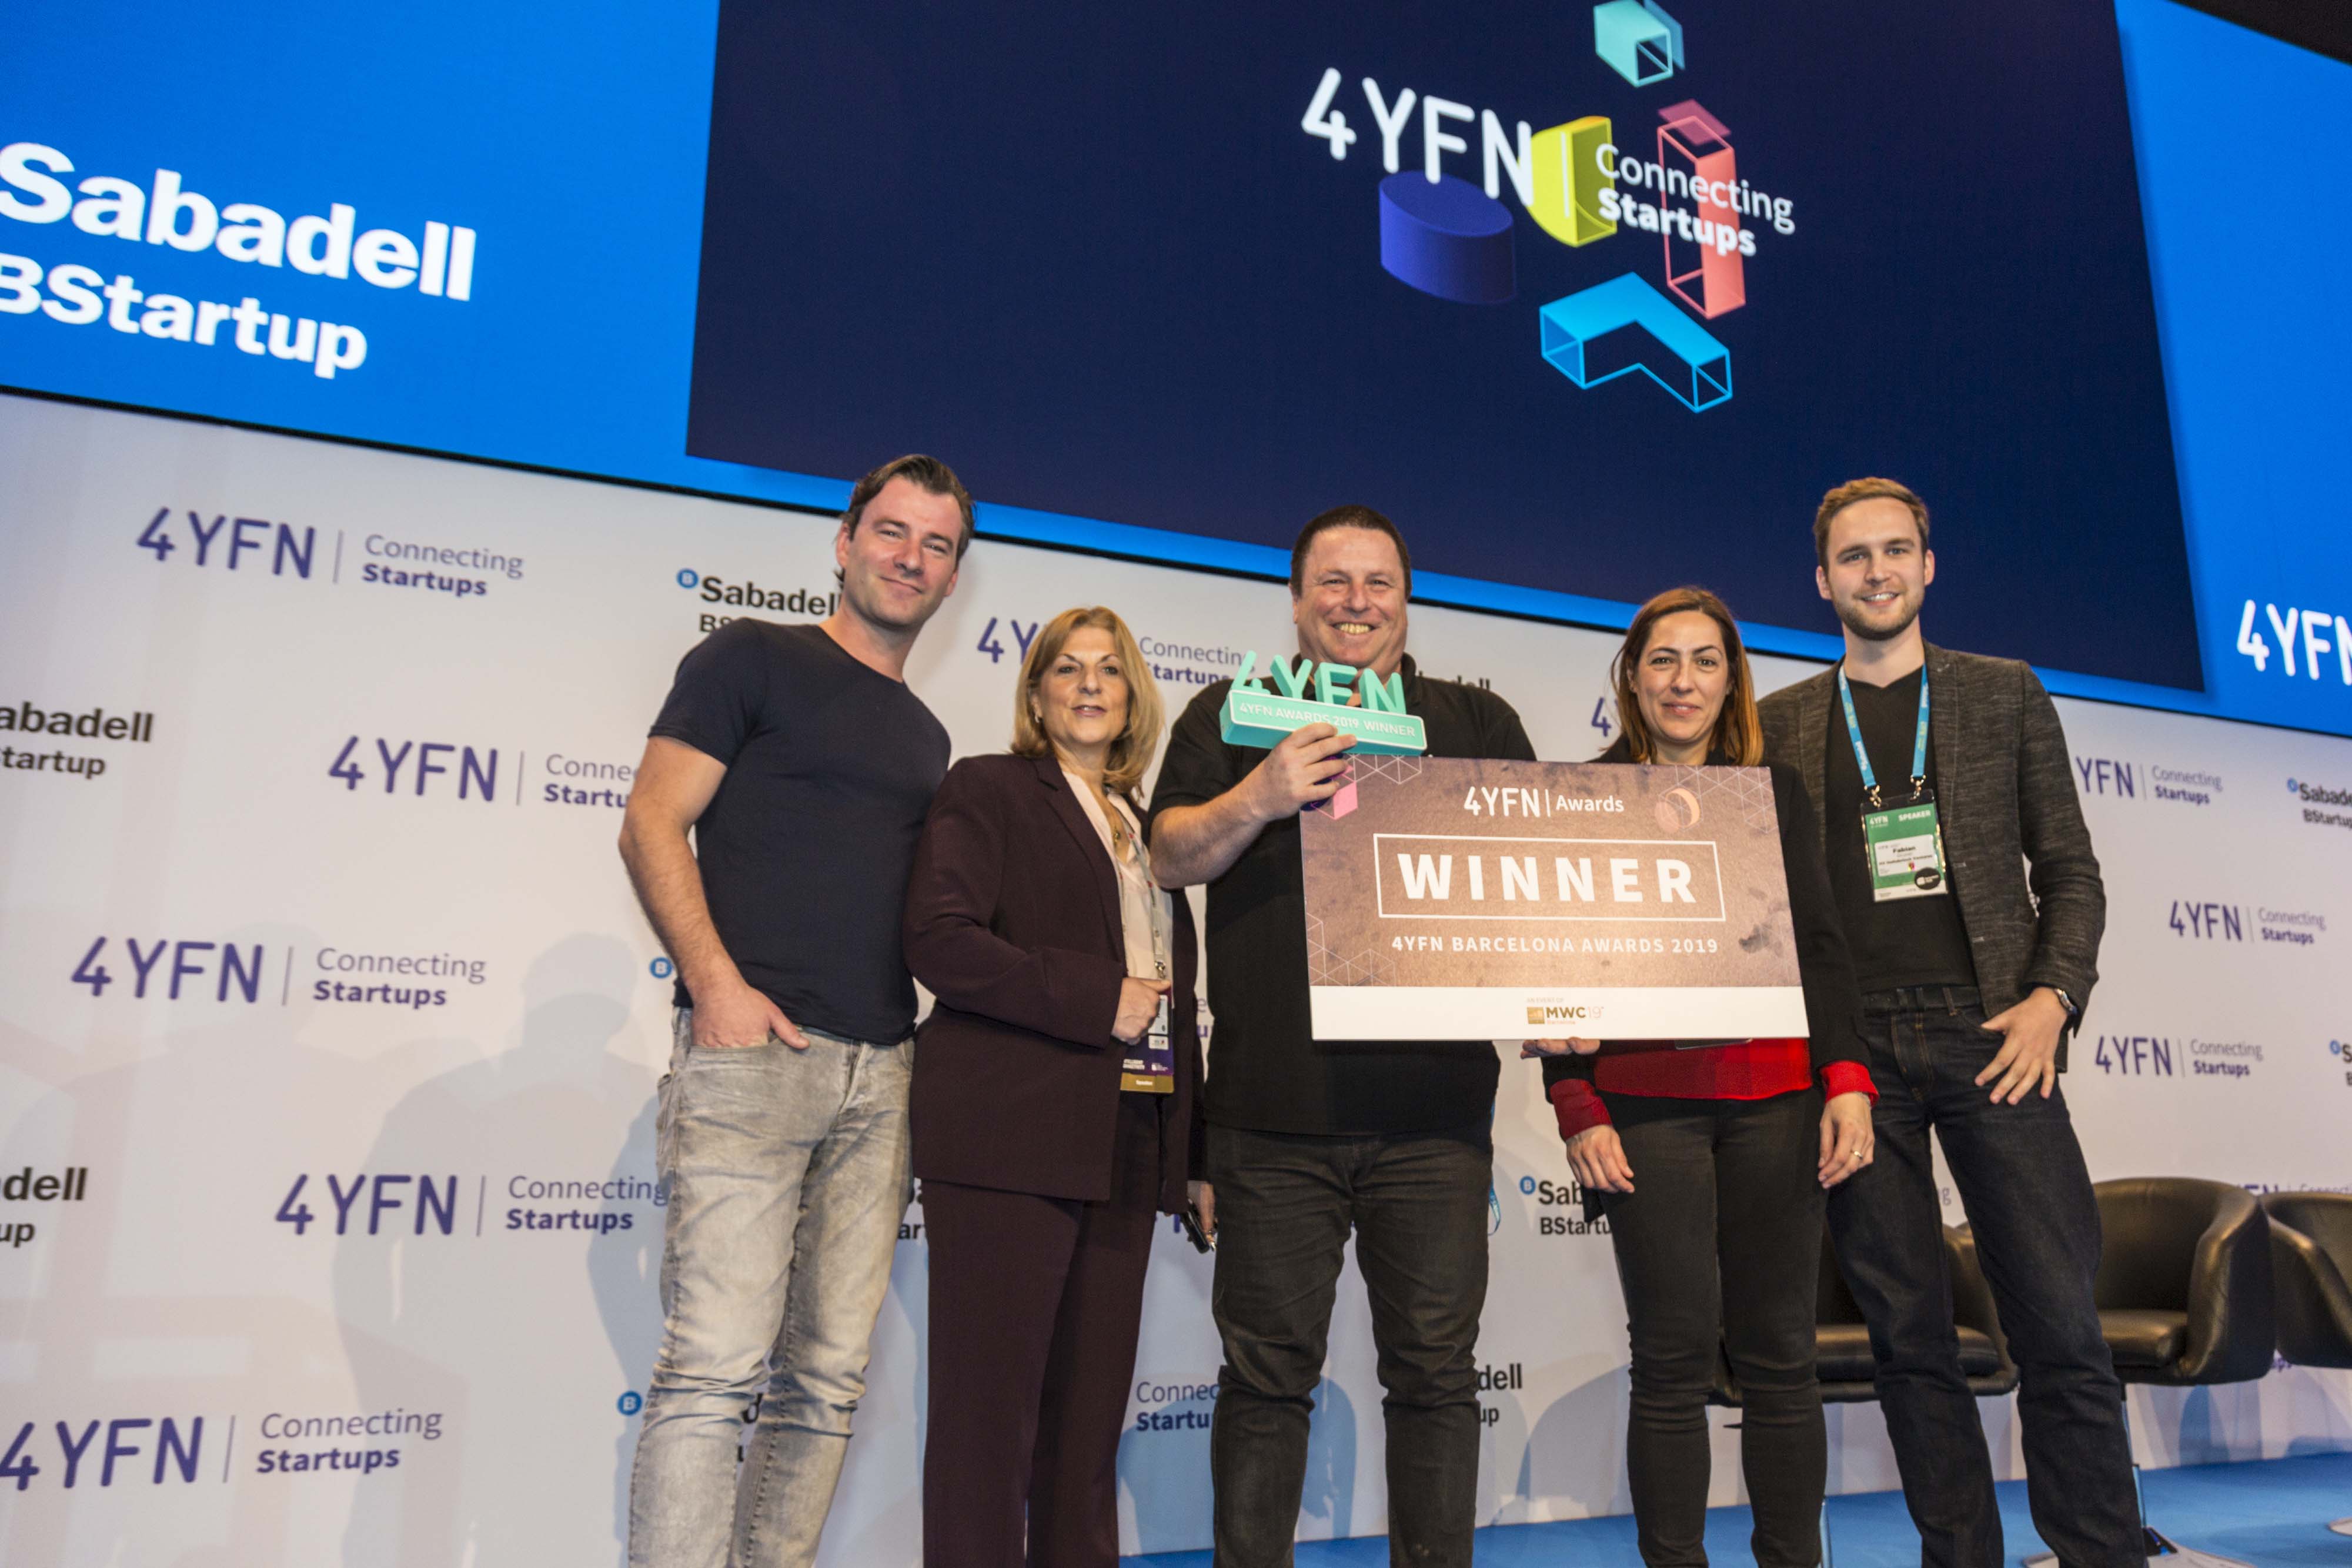 jammer gun purchases crossword , IoT Device Security Startup NanoLock Wins GSMA’s 4YFN Competition